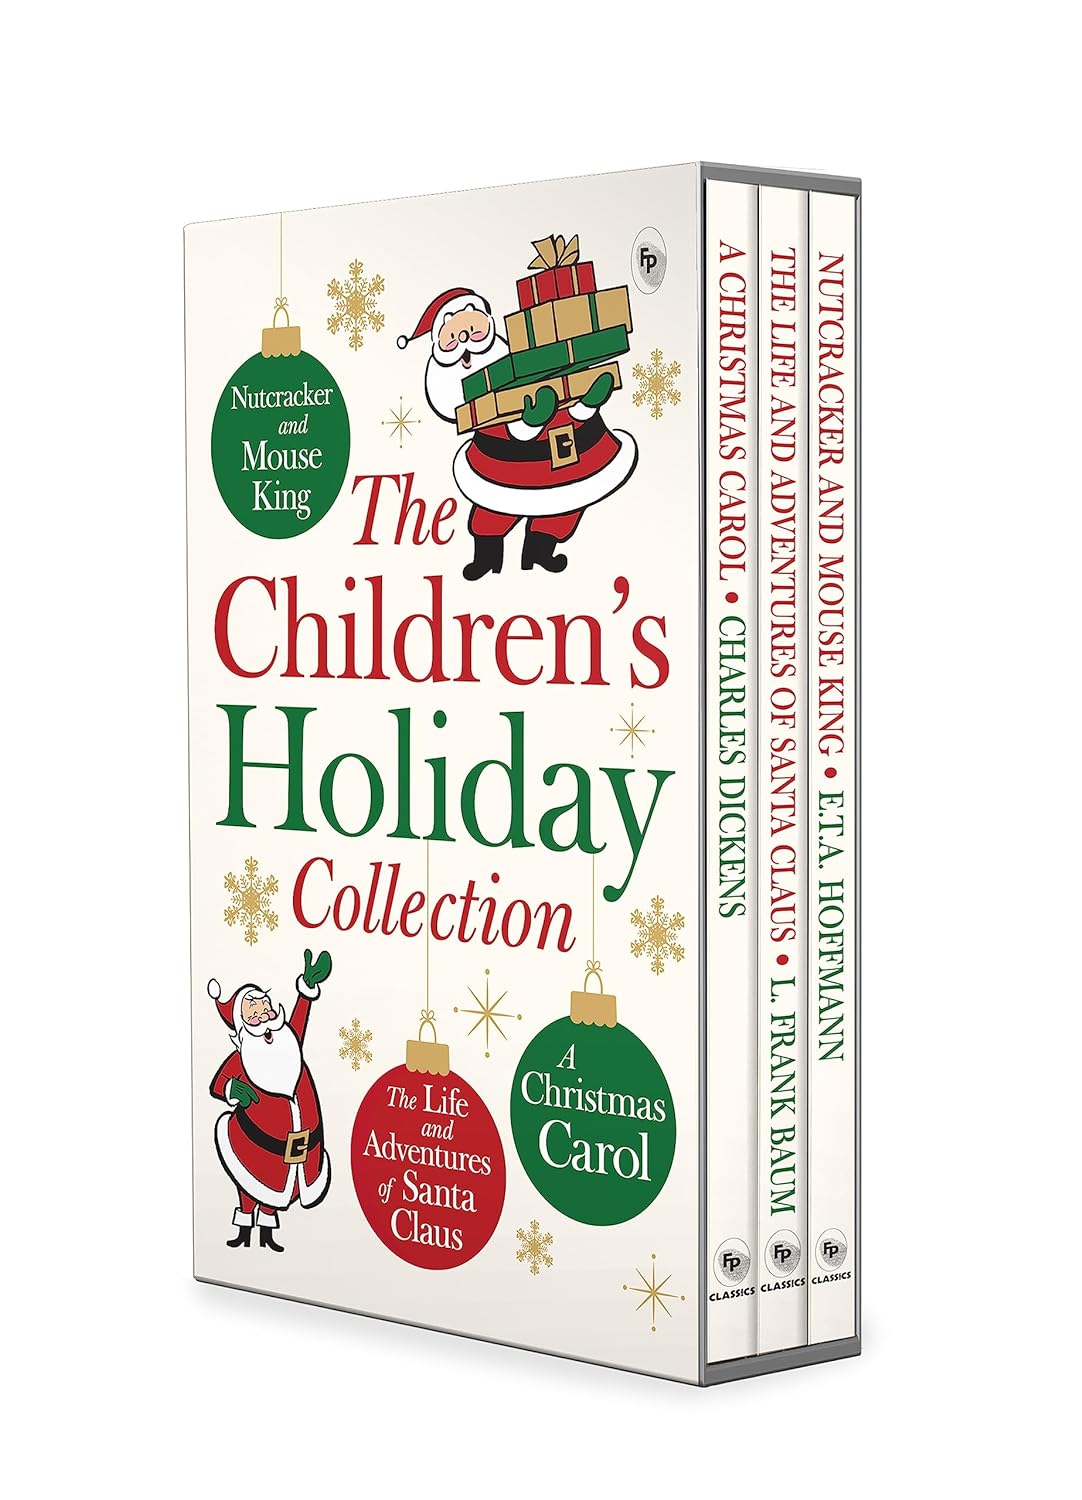 The Children’s Holiday Collection Boxed Set